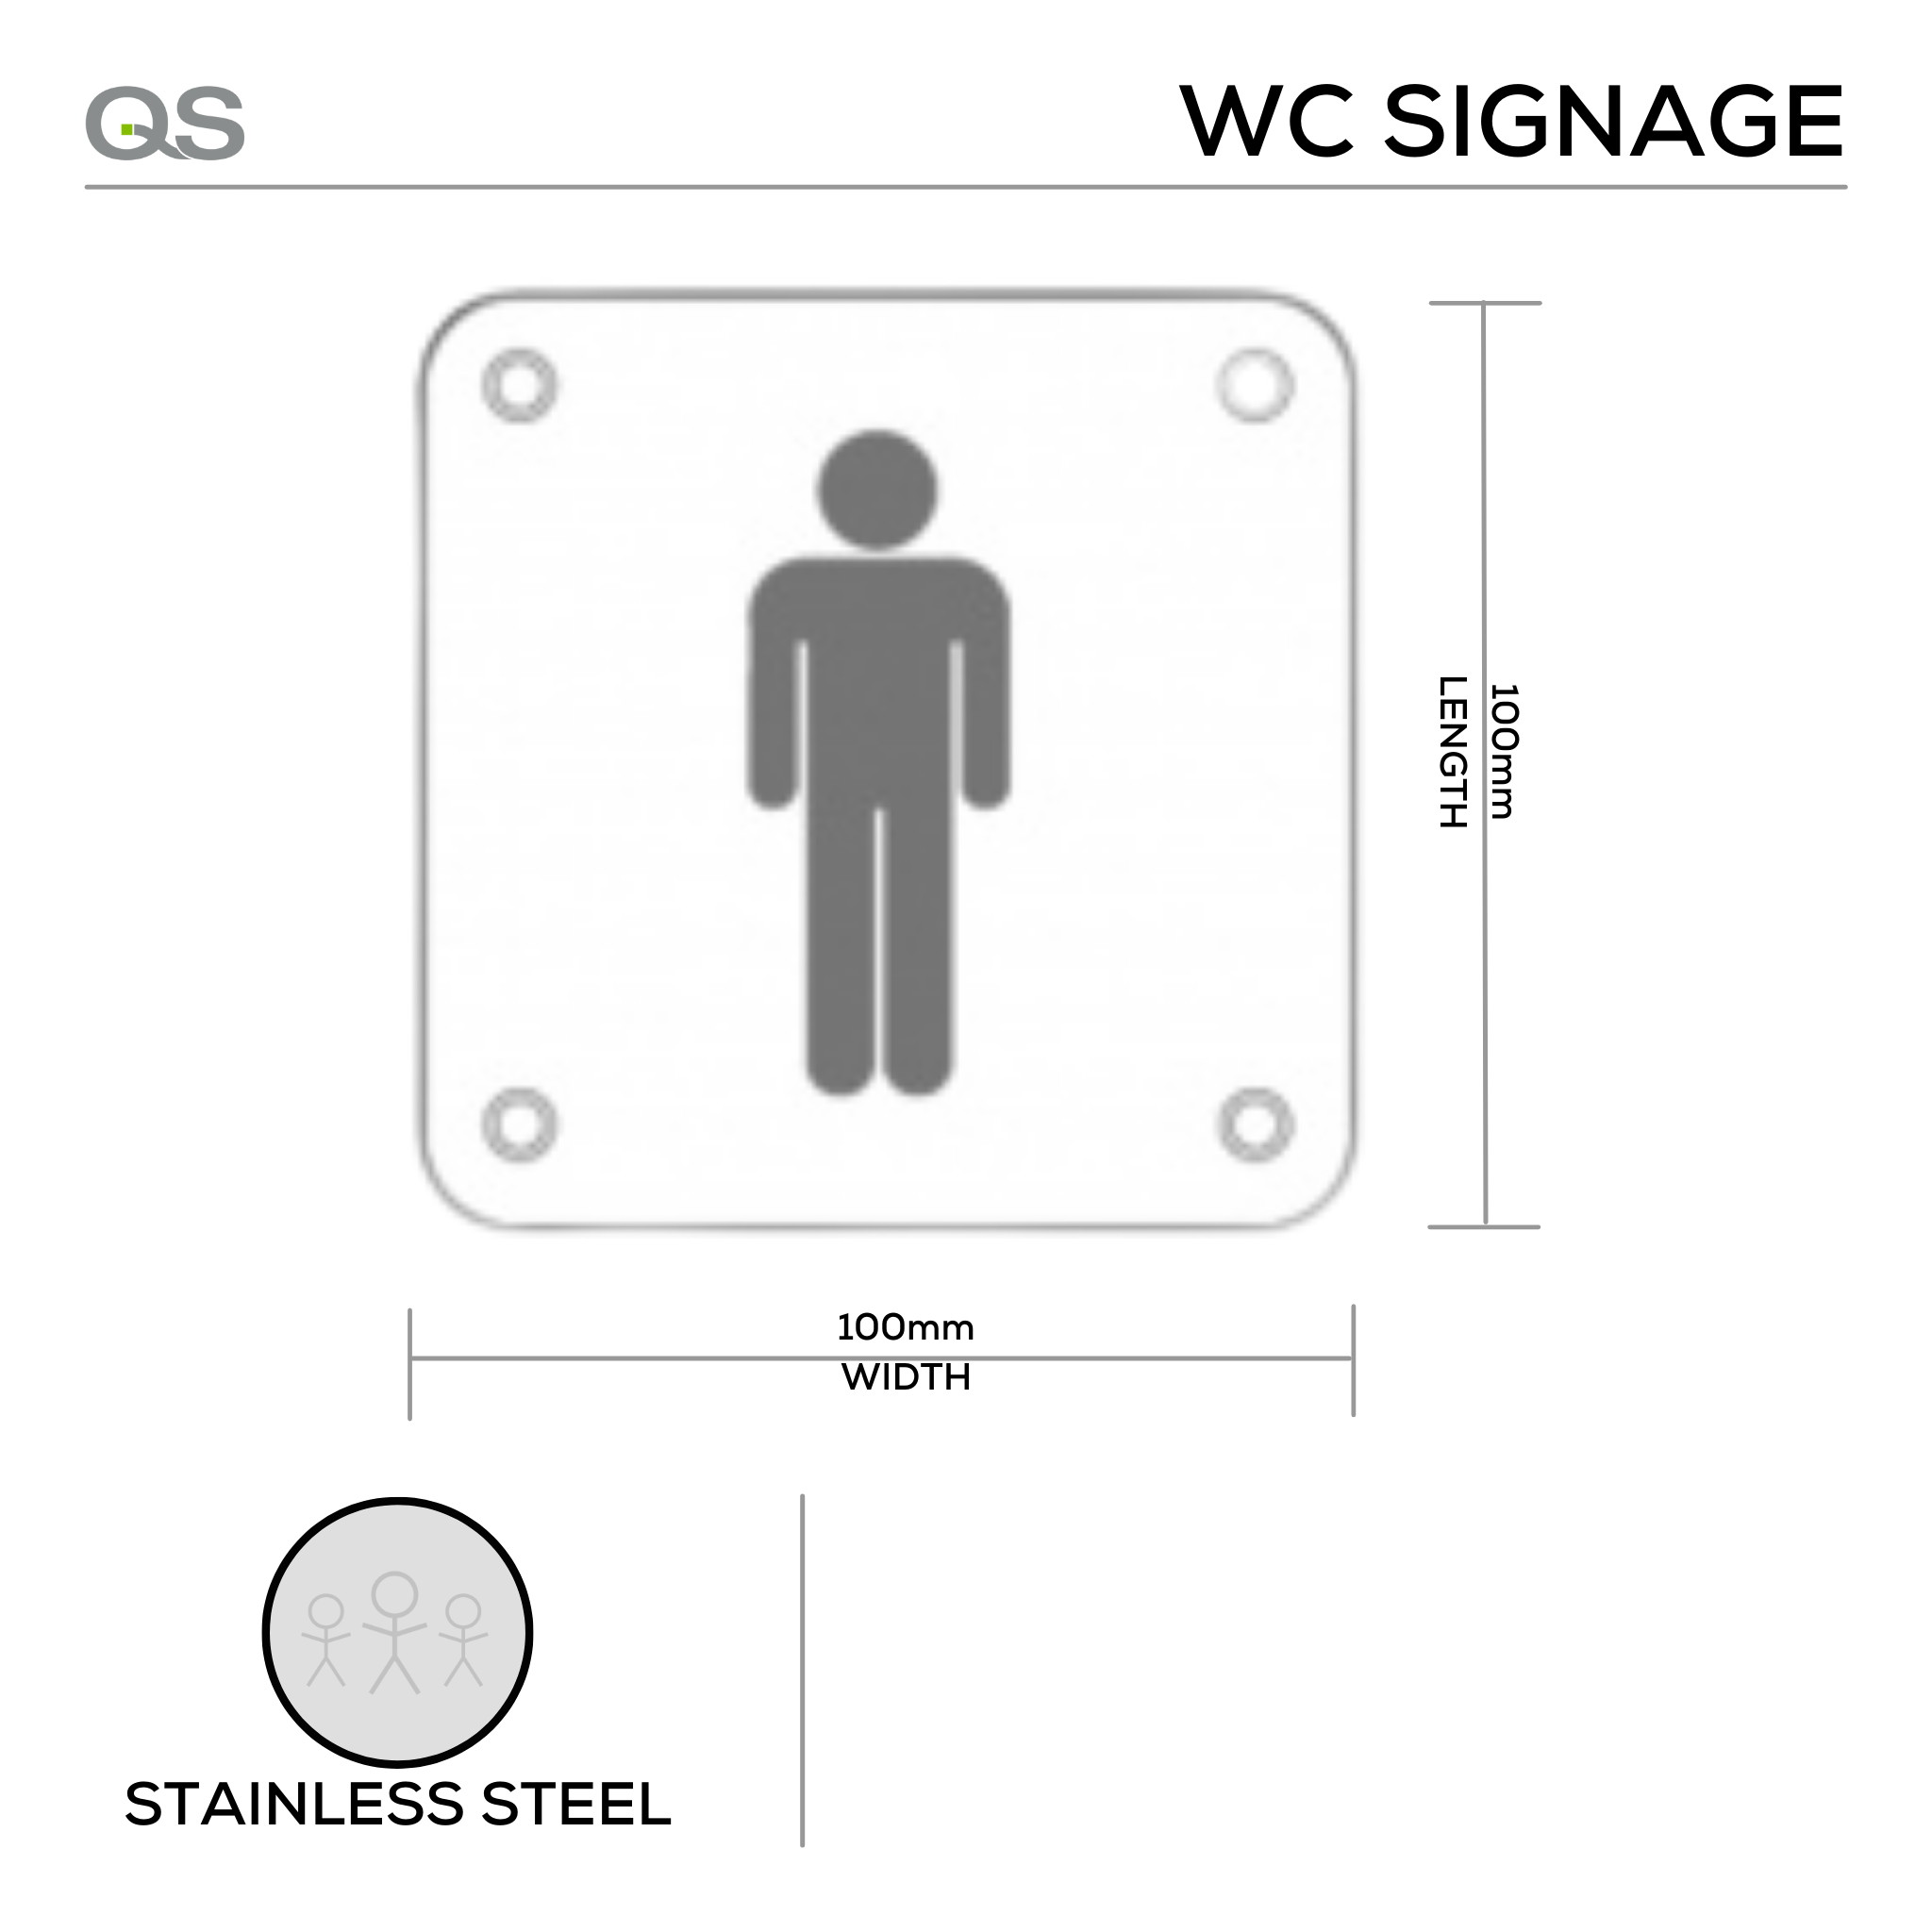 Male, Square Engraved Sign, 100mm x 100mm, Stainless Steel, QS